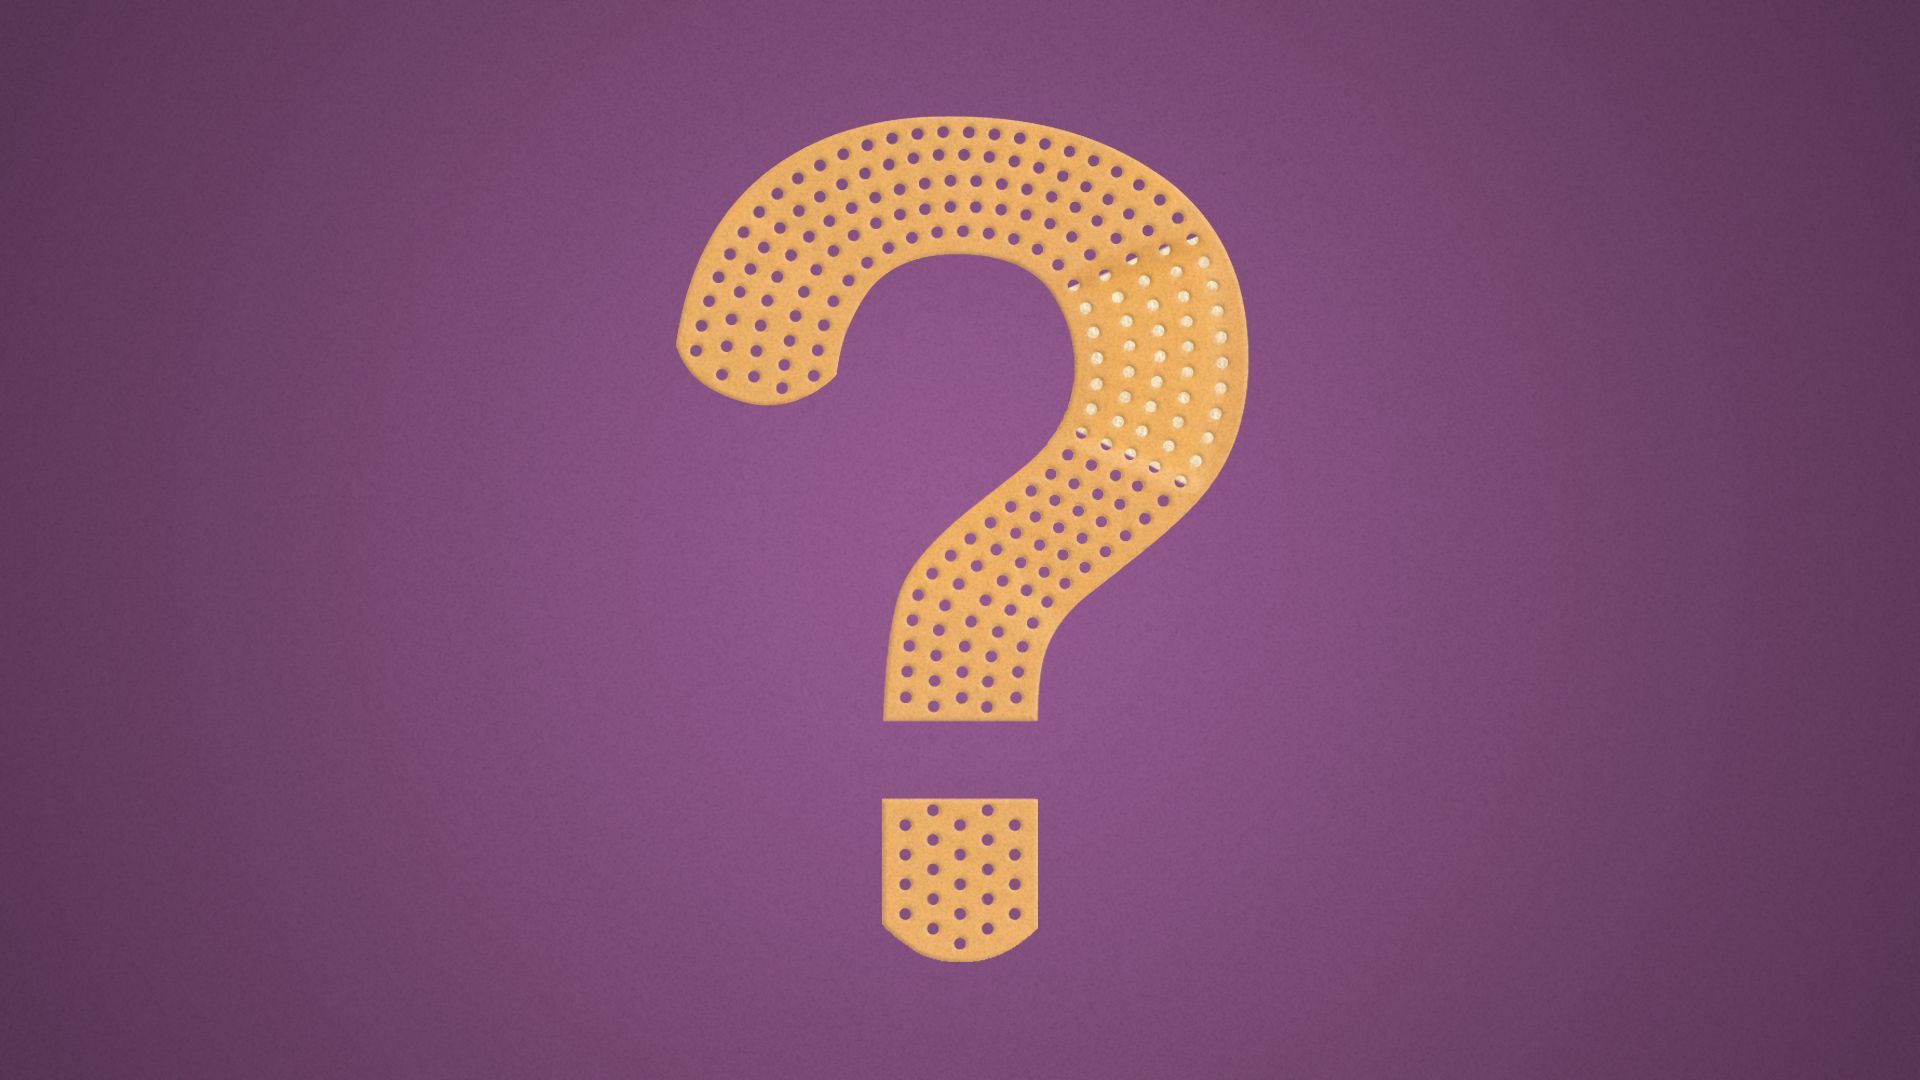 Illustration of a bandage in the shape of a question mark.